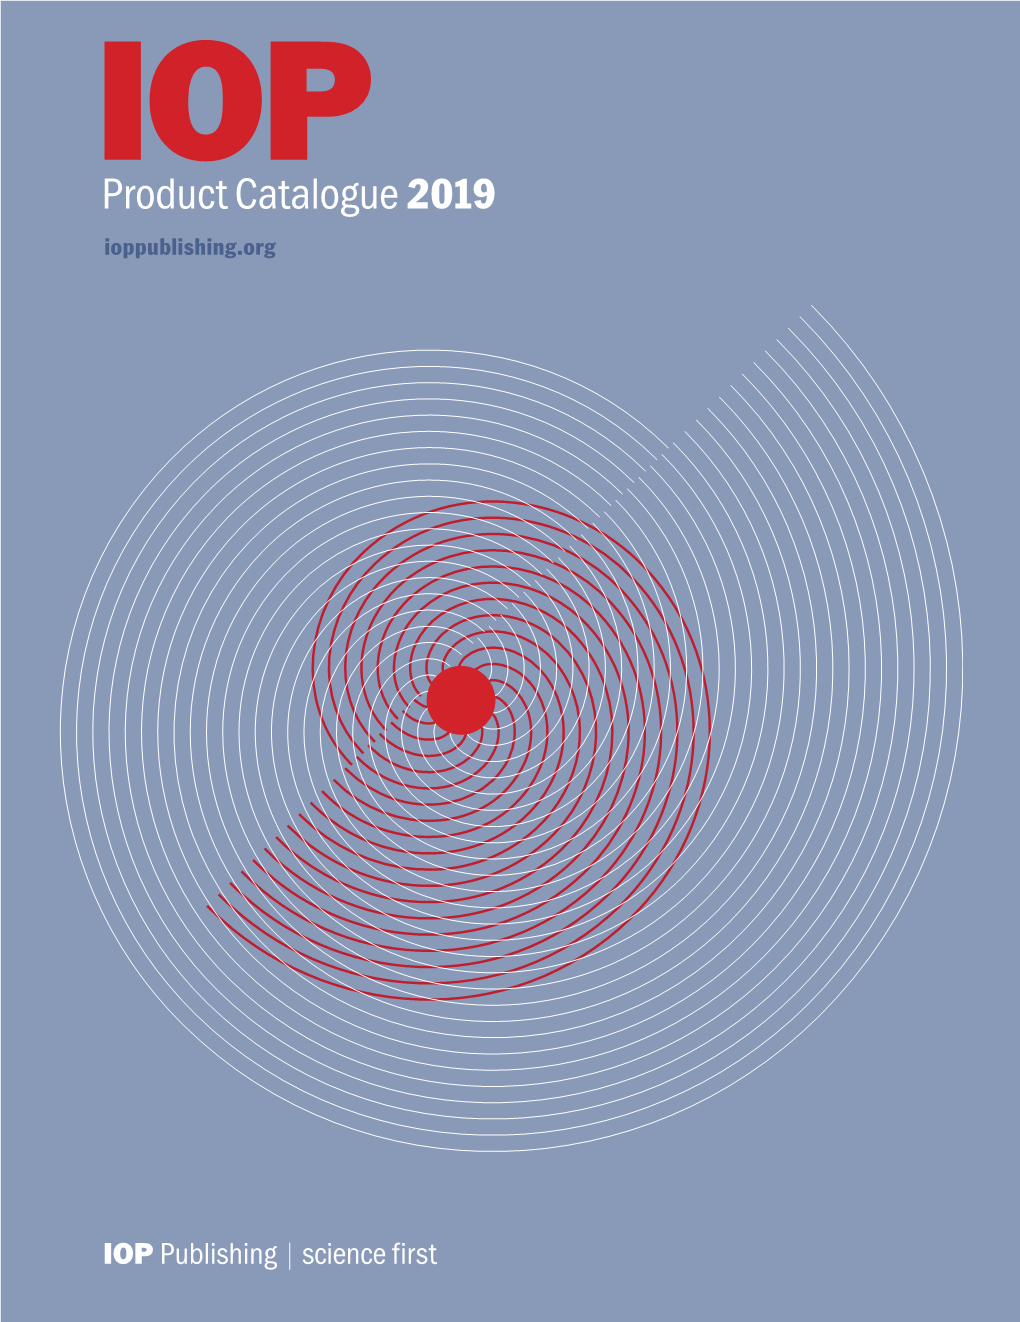 Product Catalogue 2019 Ioppublishing.Org Image: View of a Crater, from the Mars Reconnaissance Orbiter Mission